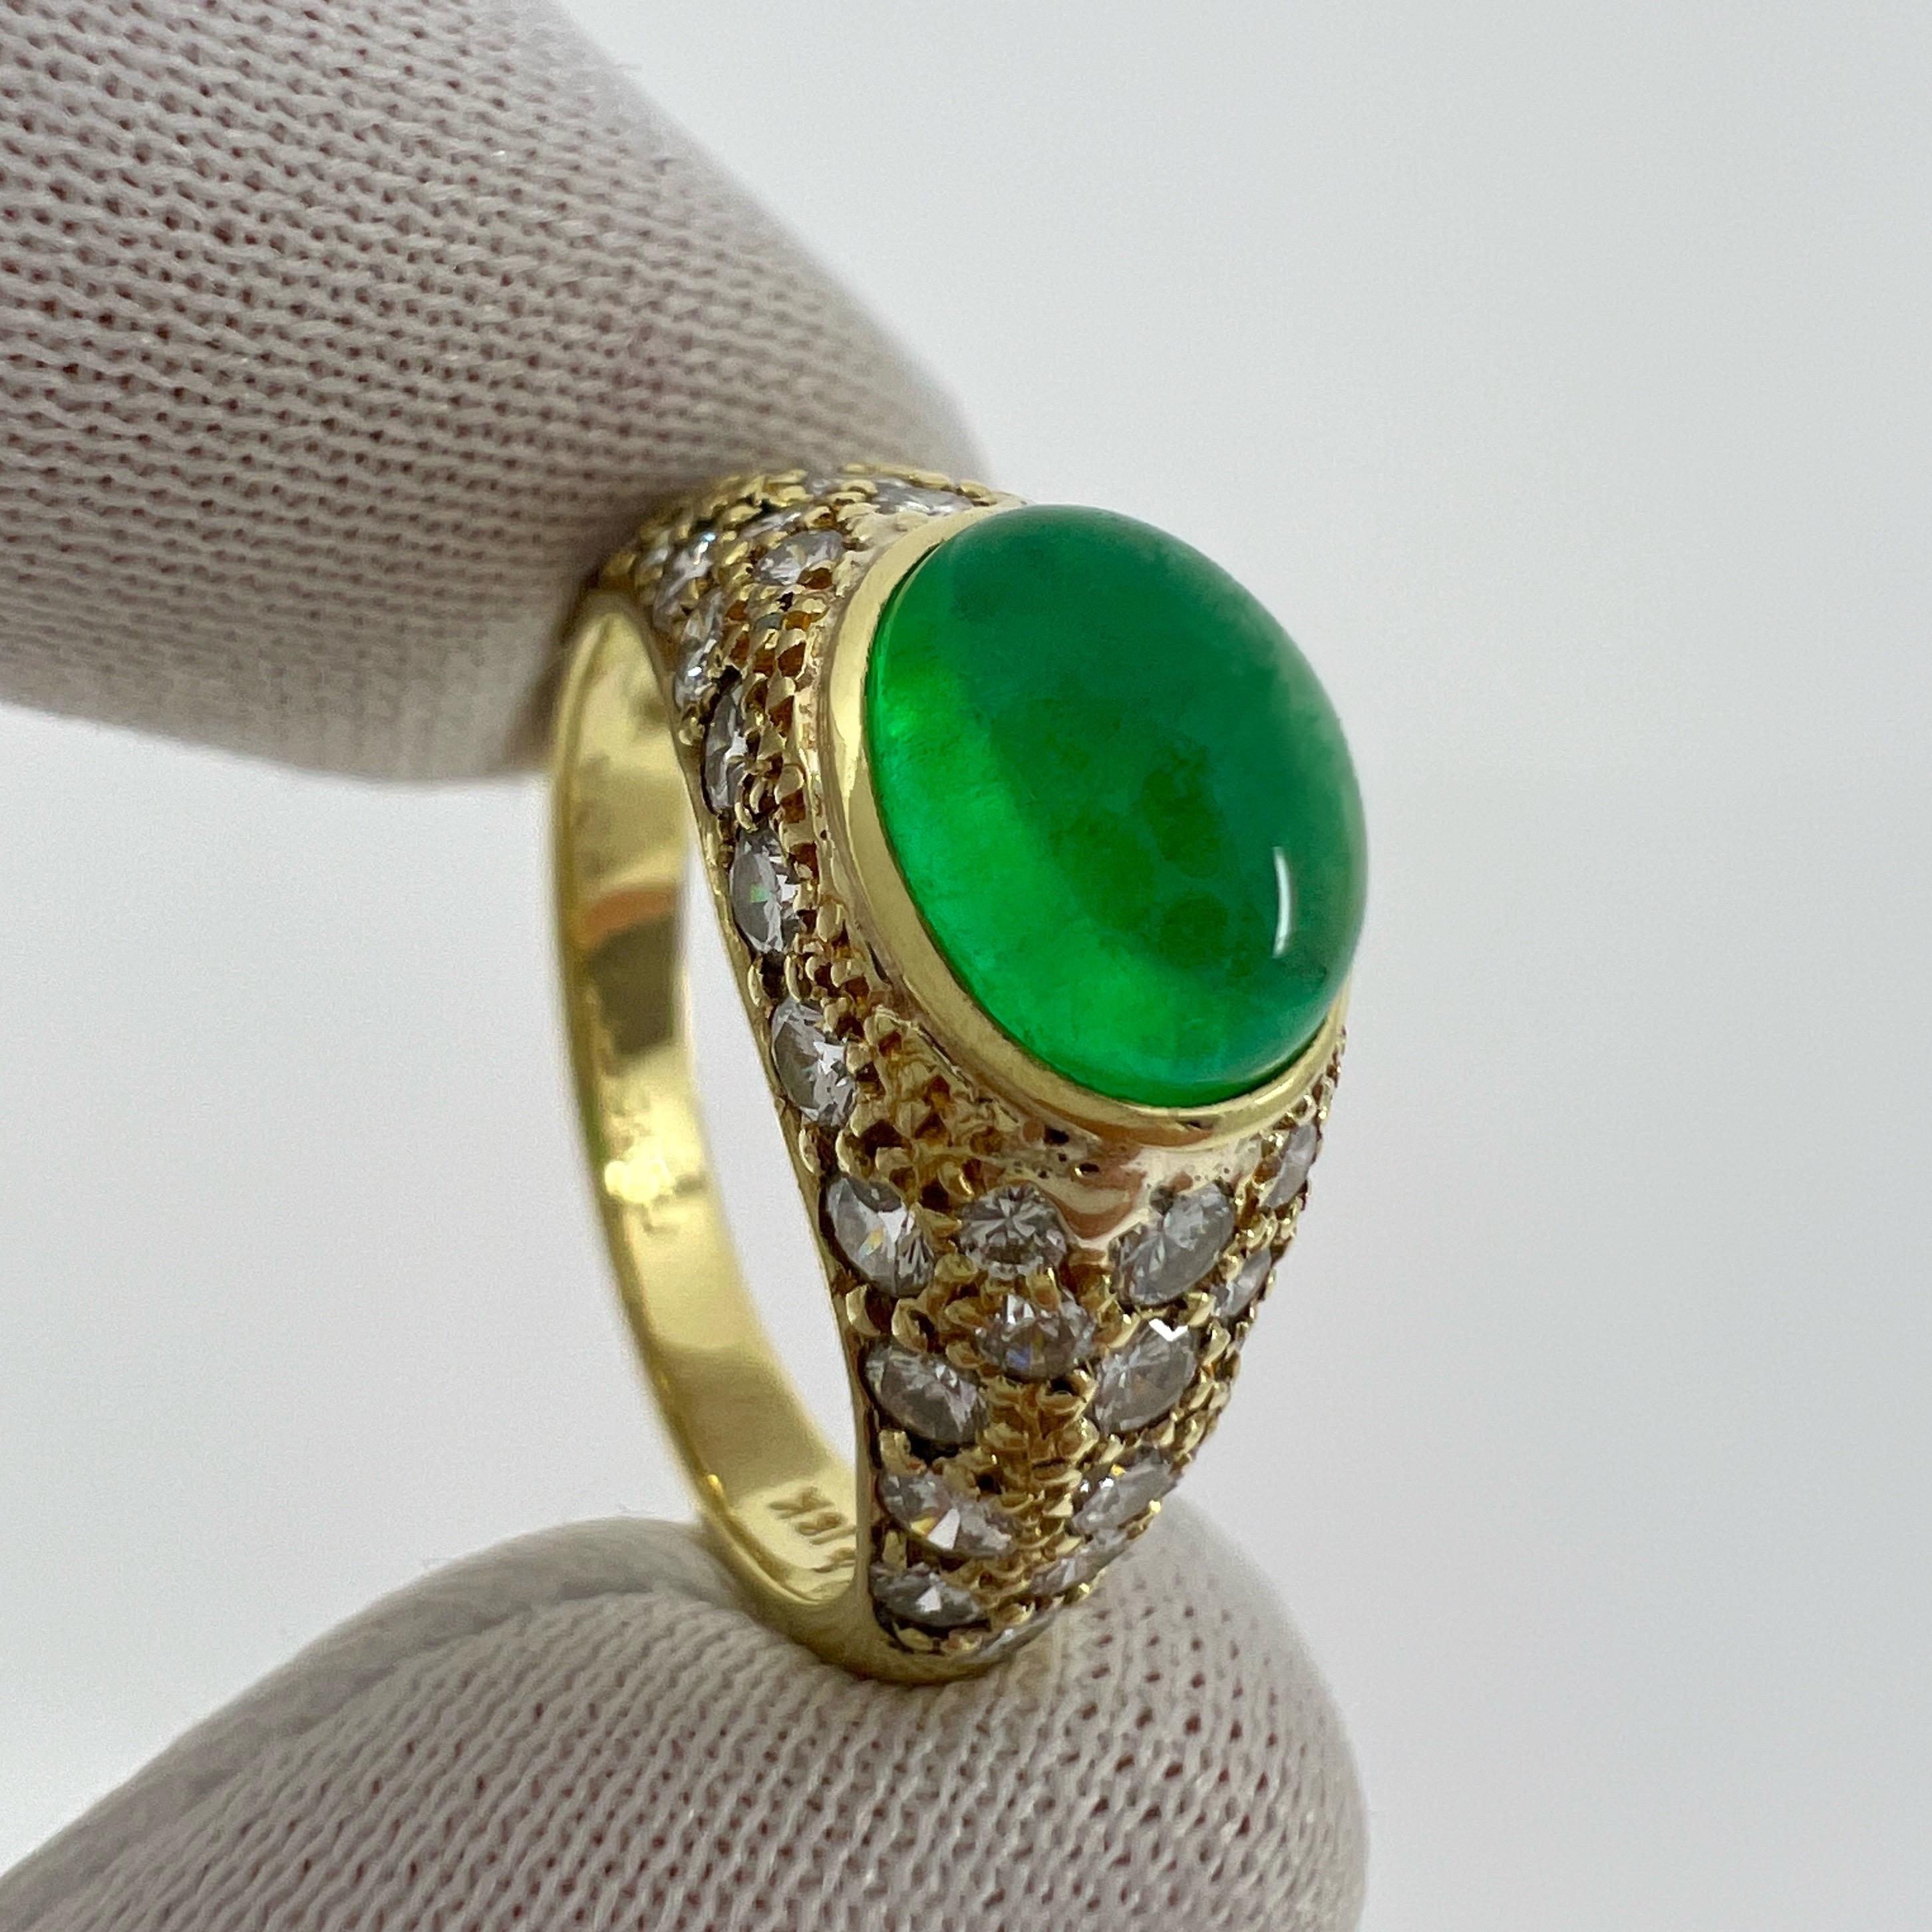 Rare Vintage Van Cleef & Arpels 2 Carat Emerald And Diamond Cocktail Dome Ring For Sale 2